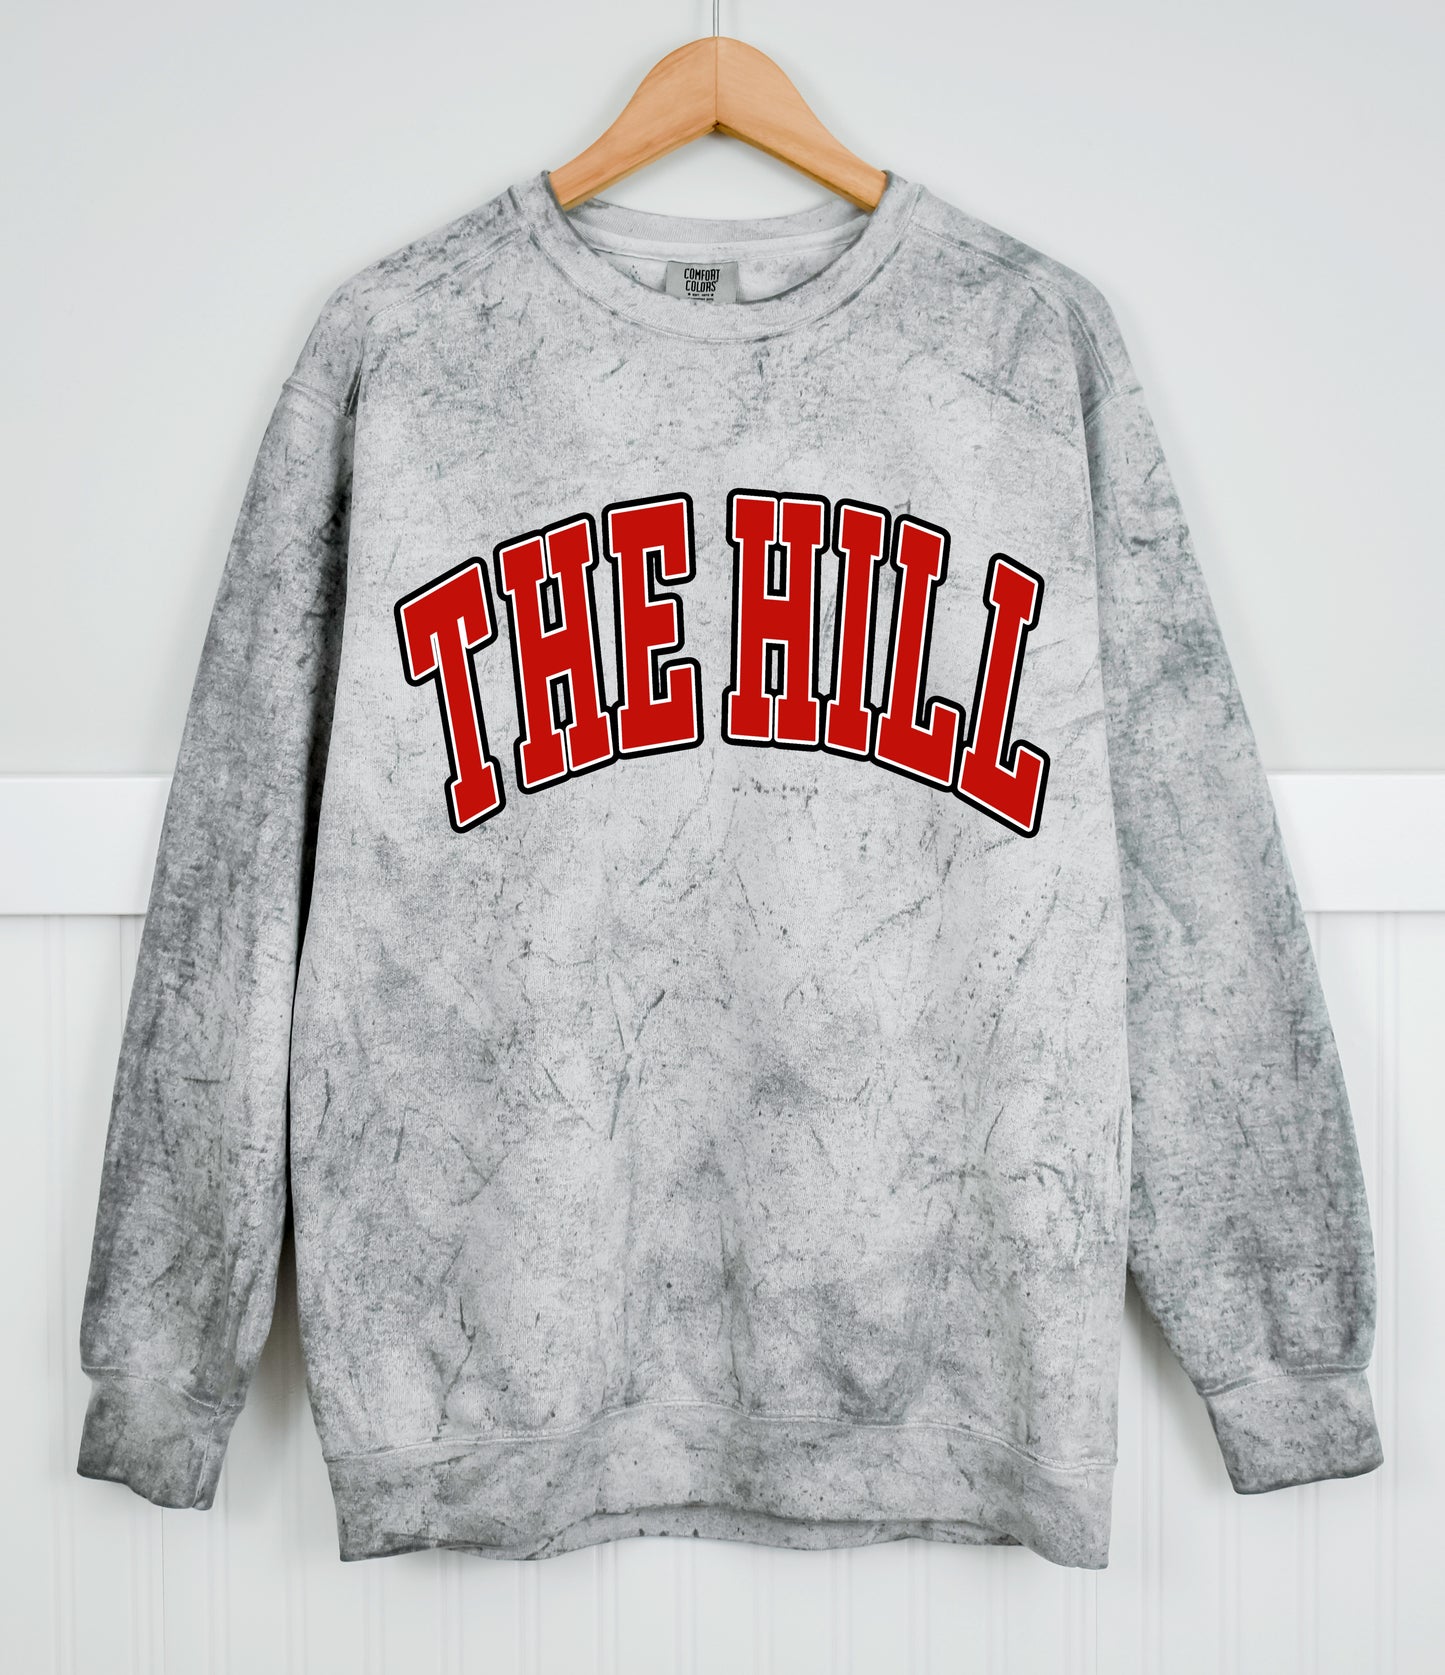 The Hill Lewisburg Comfort Colors Colorblast Sweatshirt - Sizes and Inventory Limited